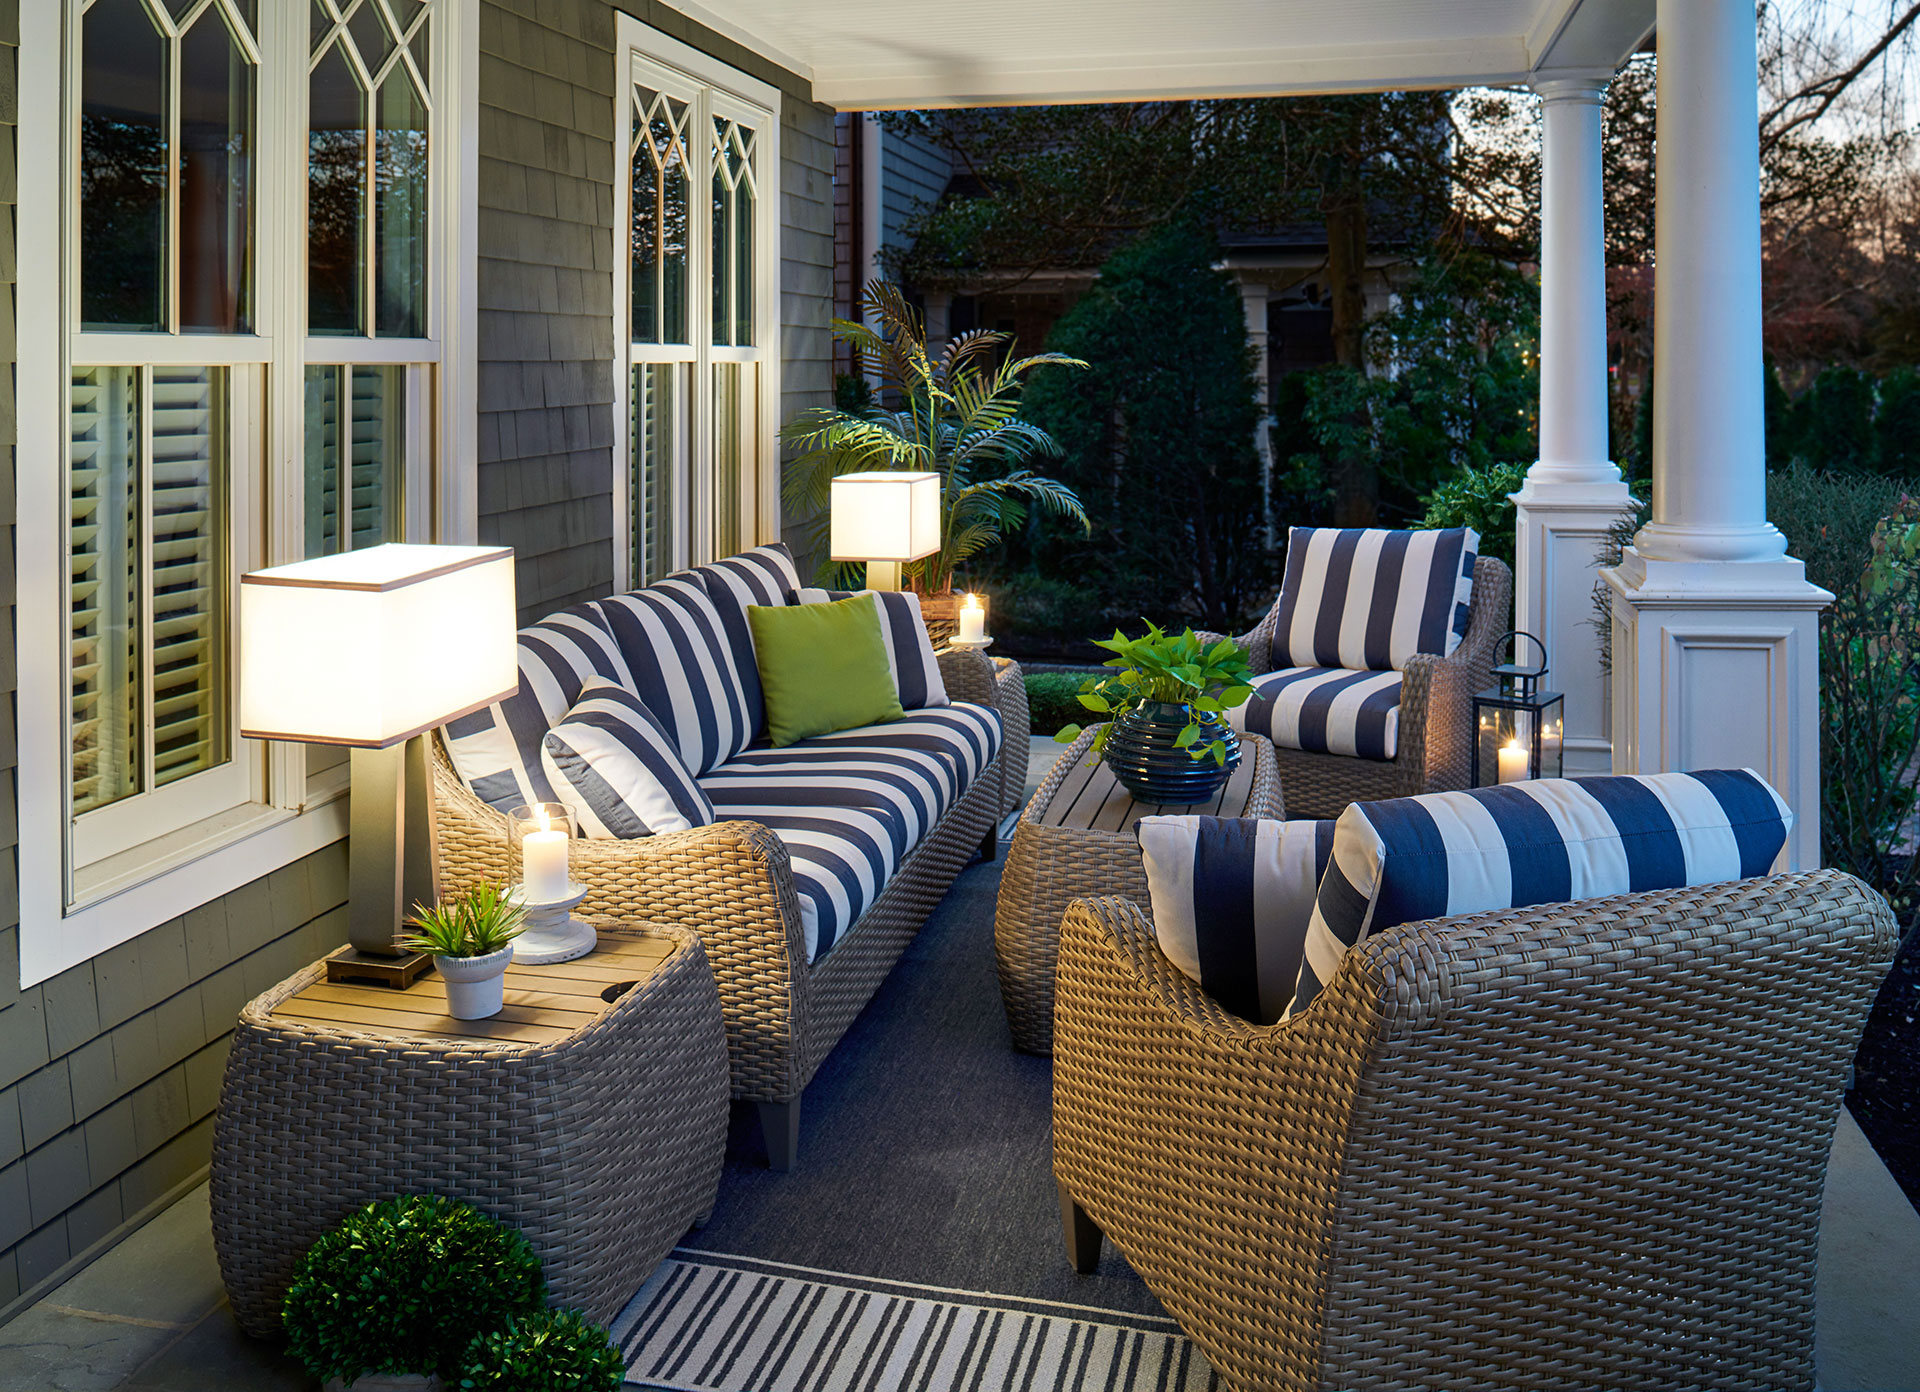 Prepare your porch for spring: Consider these décor tips